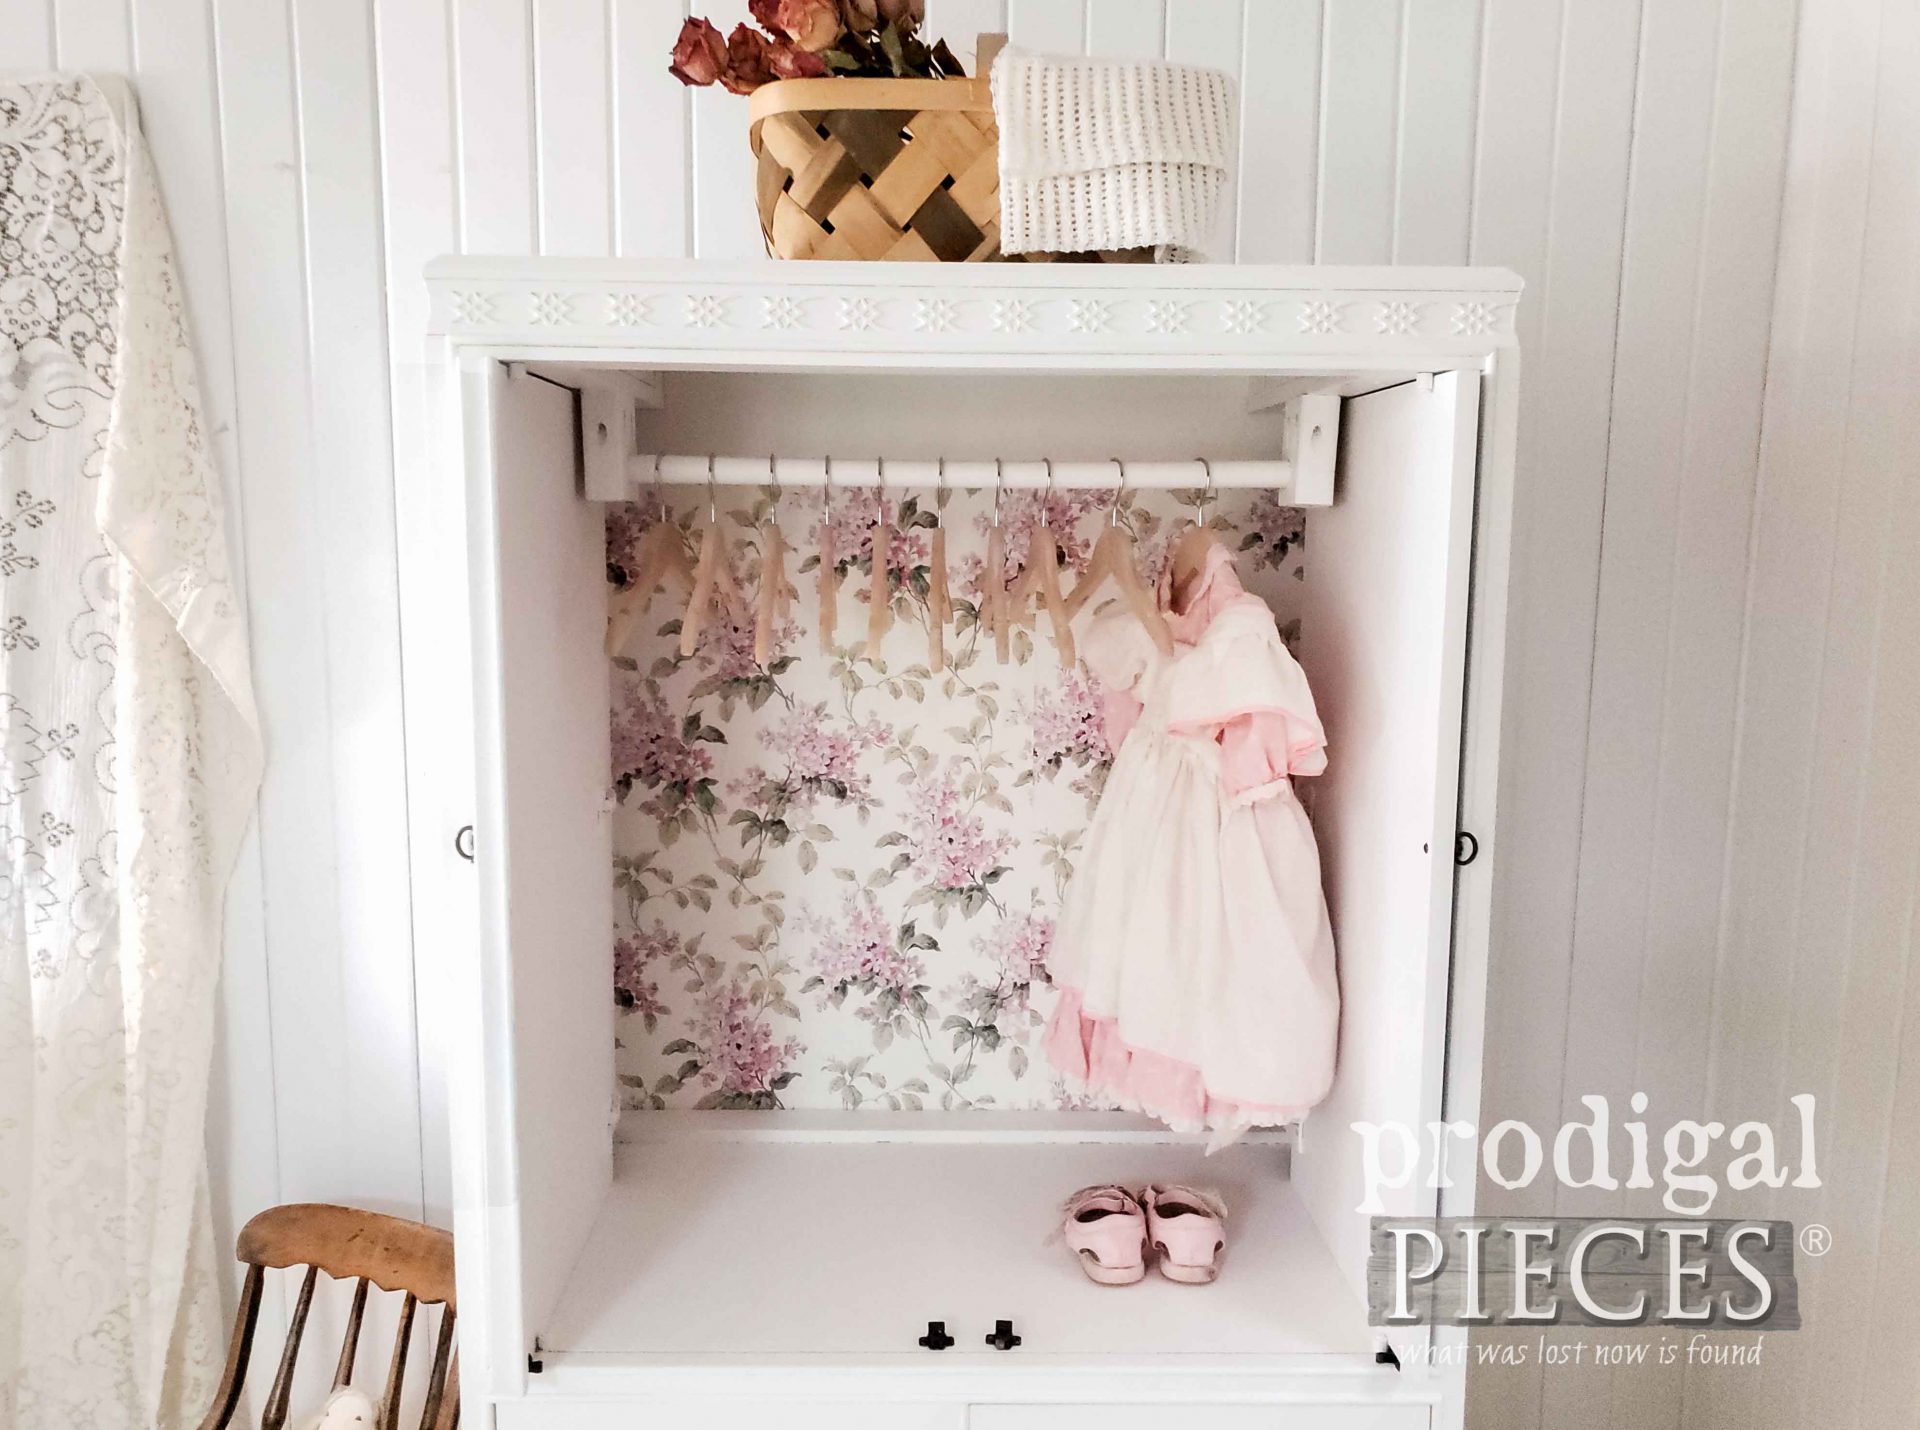 You can create this Upcycled Entertainment Center turned Child's Wardrobe too! | Details at prodigalpieces.com #prodigalpieces #diy #home #furniture #homedecor #upcycle